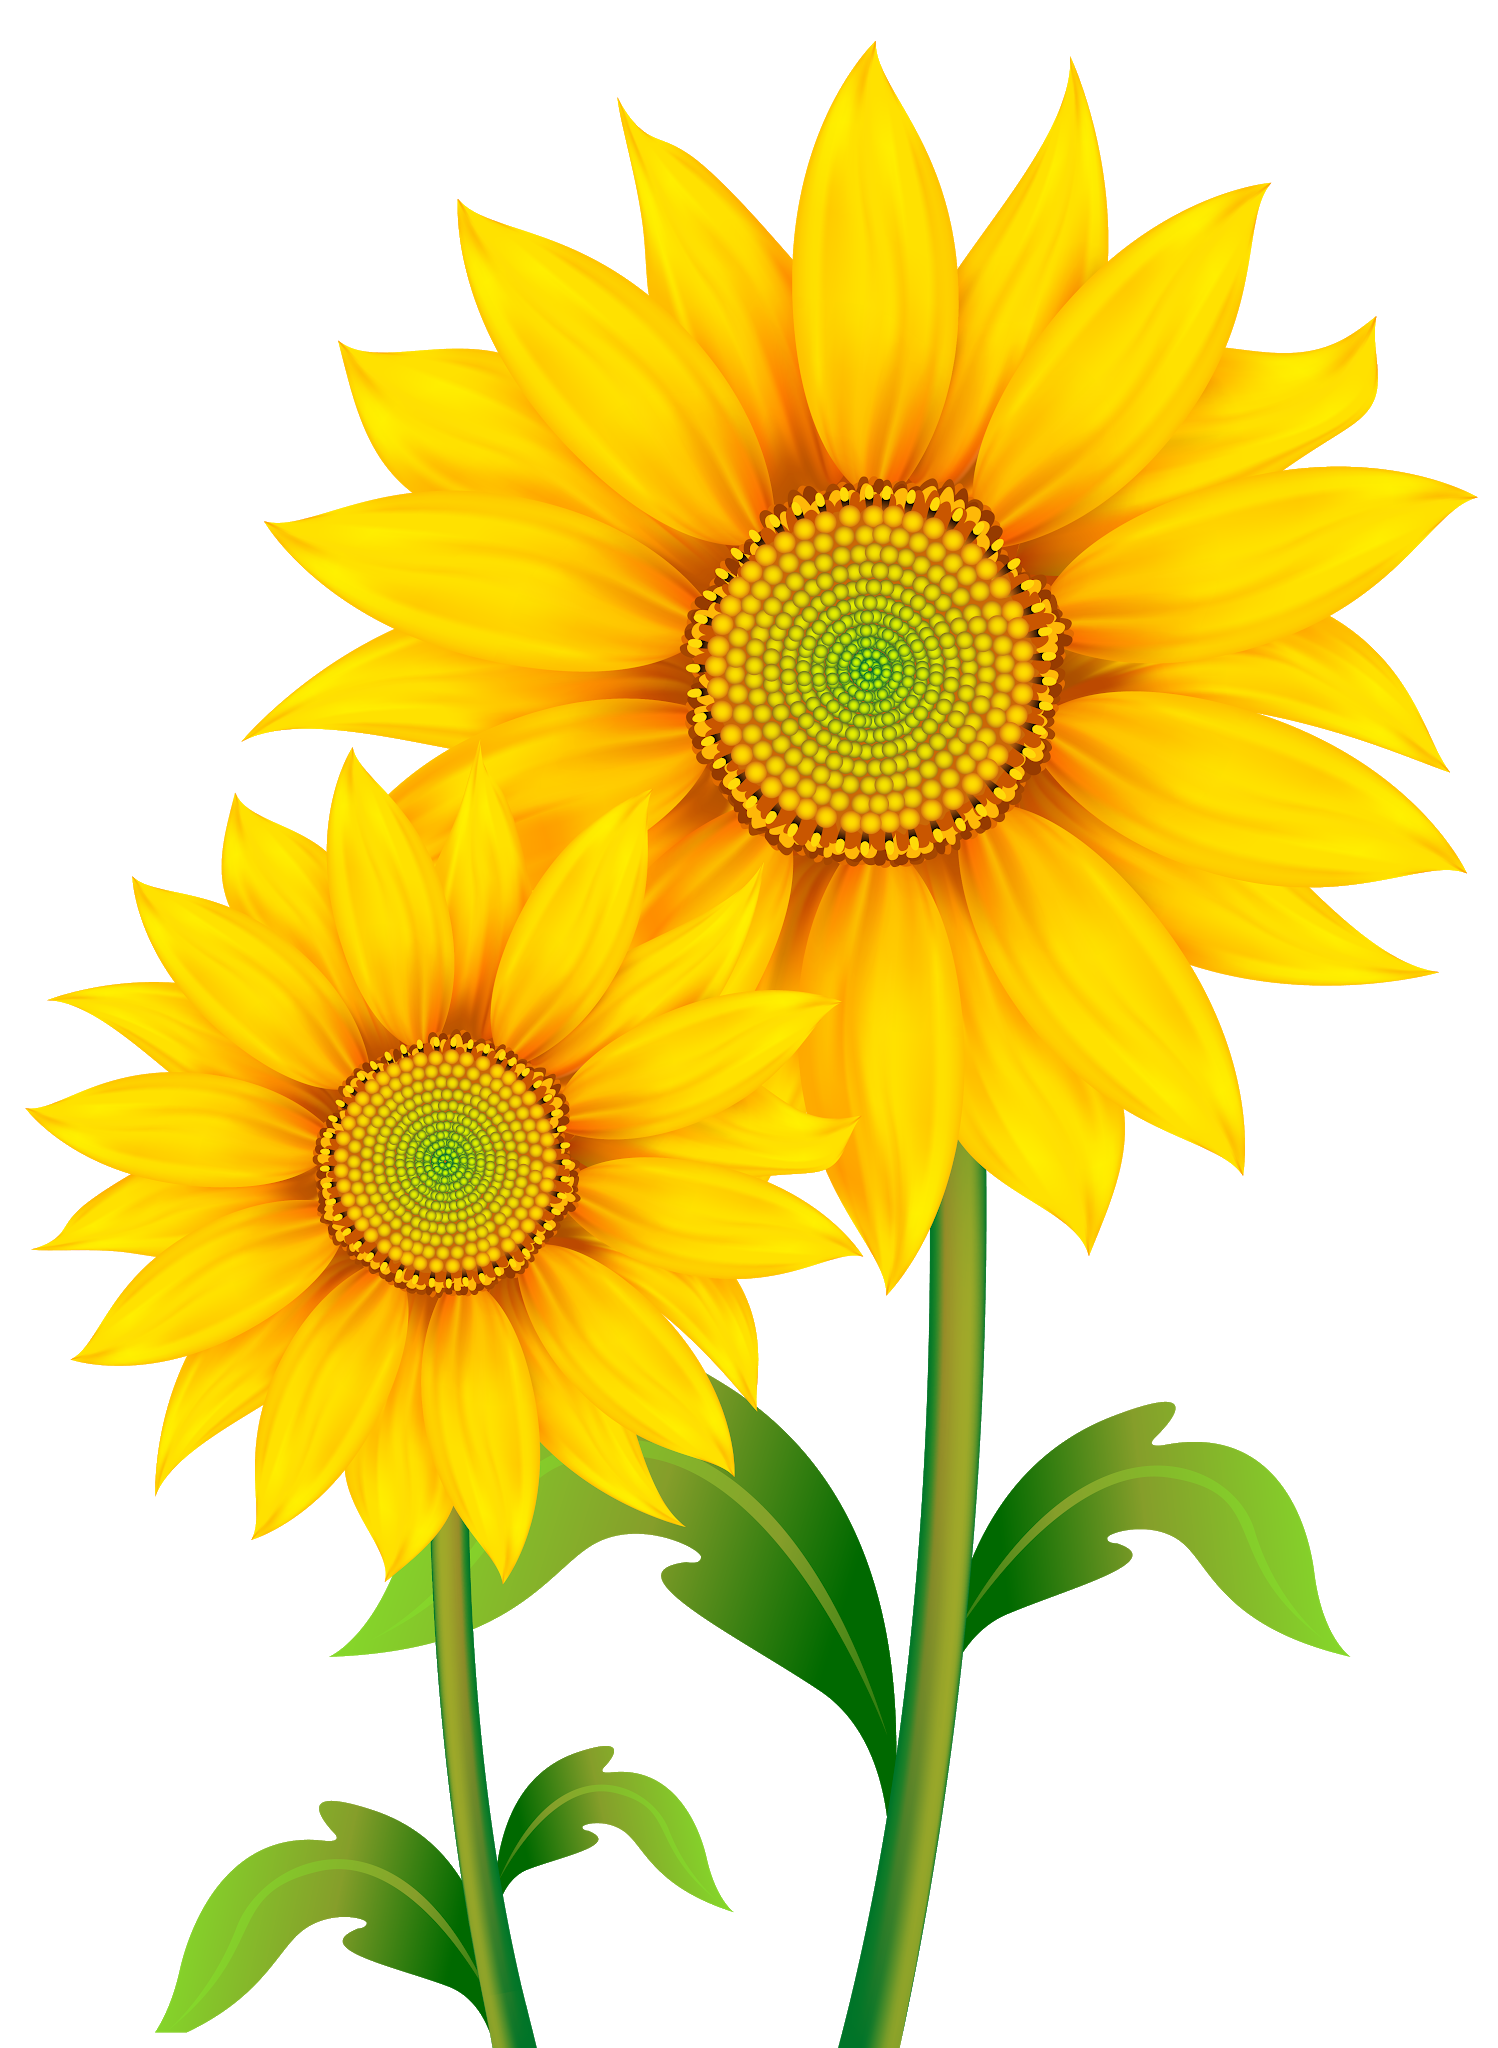 Sunflower PNG Free File Download